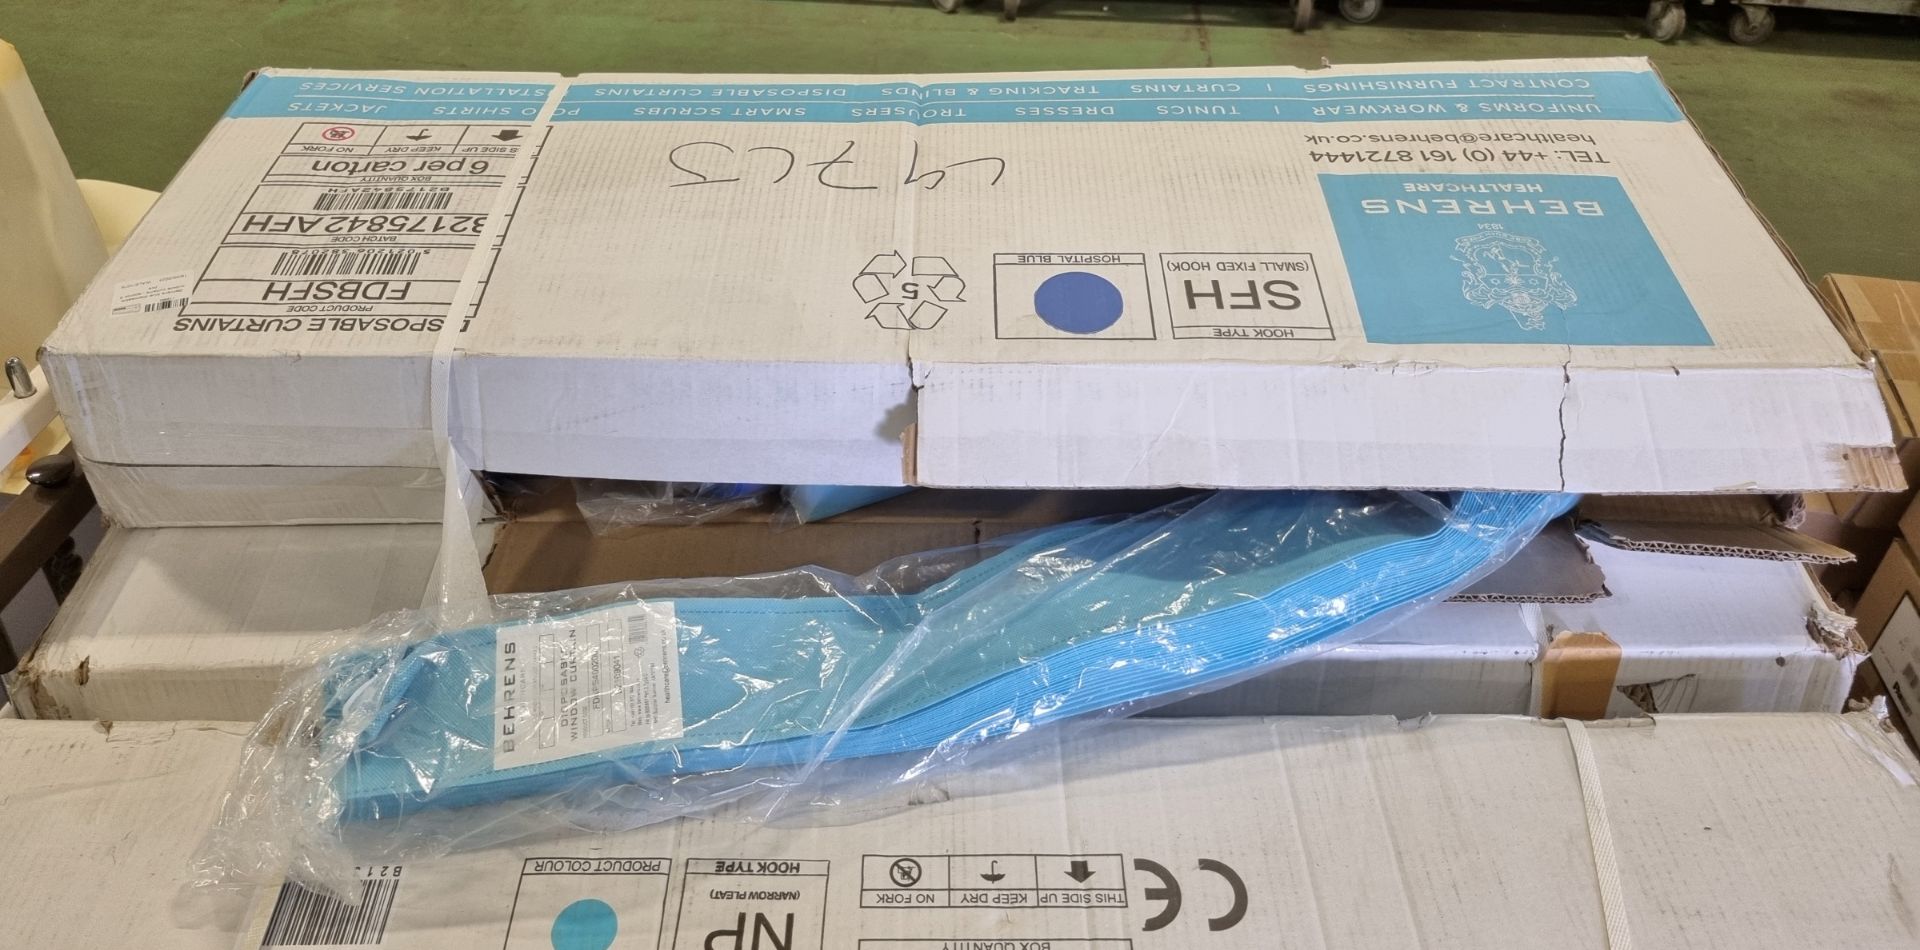 6x boxes of Behrens FDNPS400200 blue disposable cubicle curtains - approx 20 pcs per box - Image 2 of 4